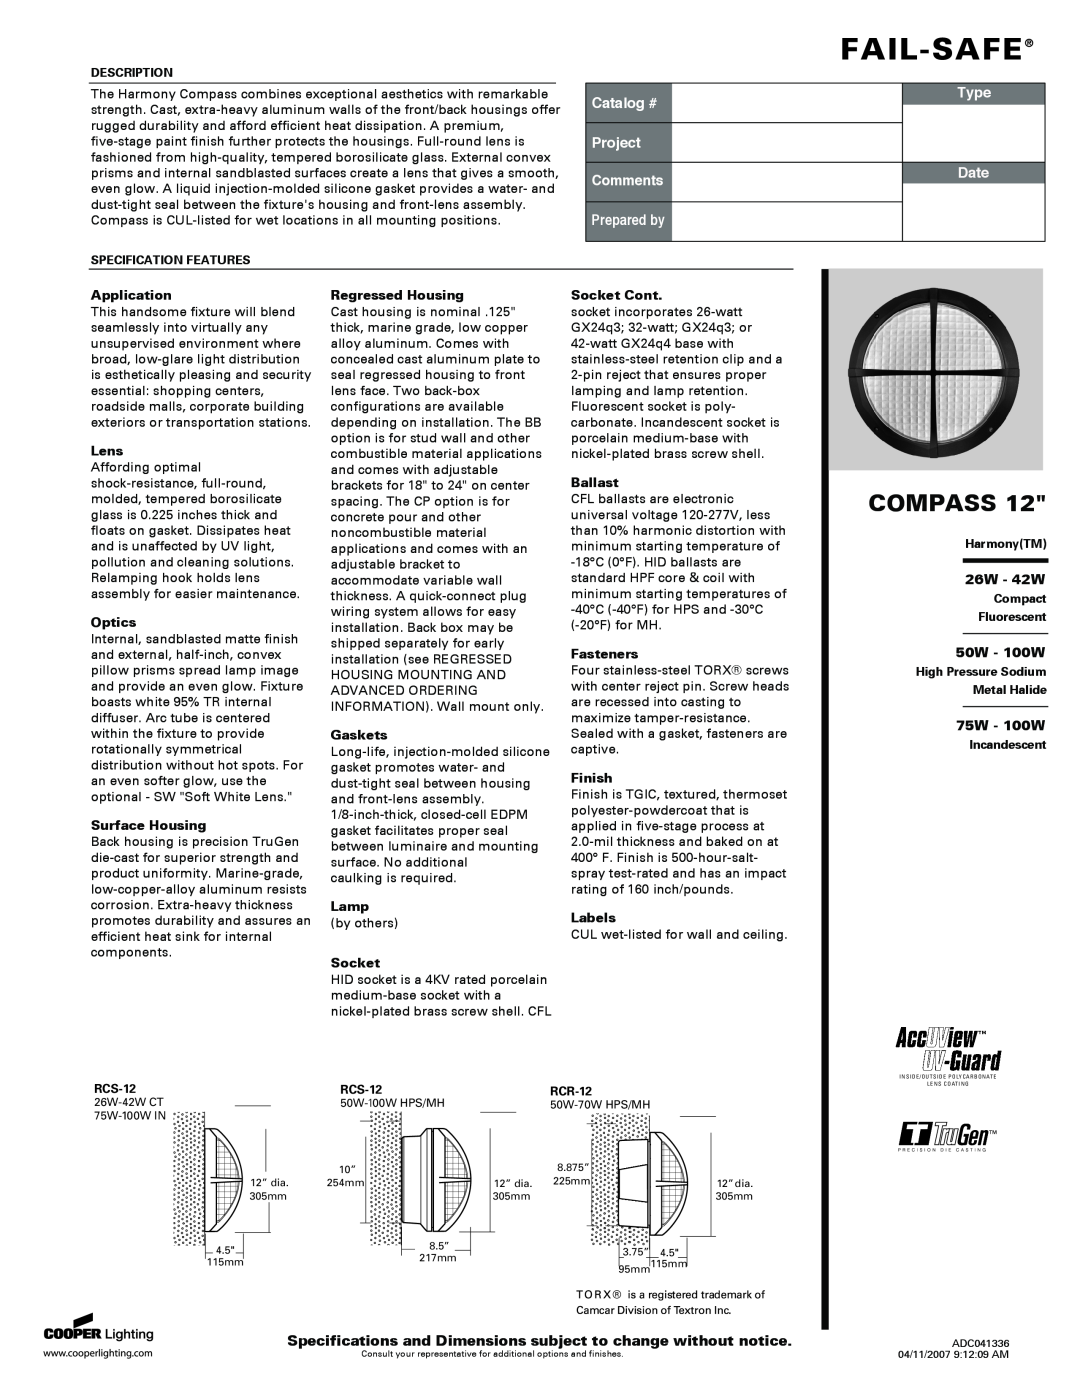 Cooper Lighting Compass 12 specifications 26W - 42W, 50W - 100W, 75W - 100W, Fail-Safe, Catalog #, Project Comments, Type 